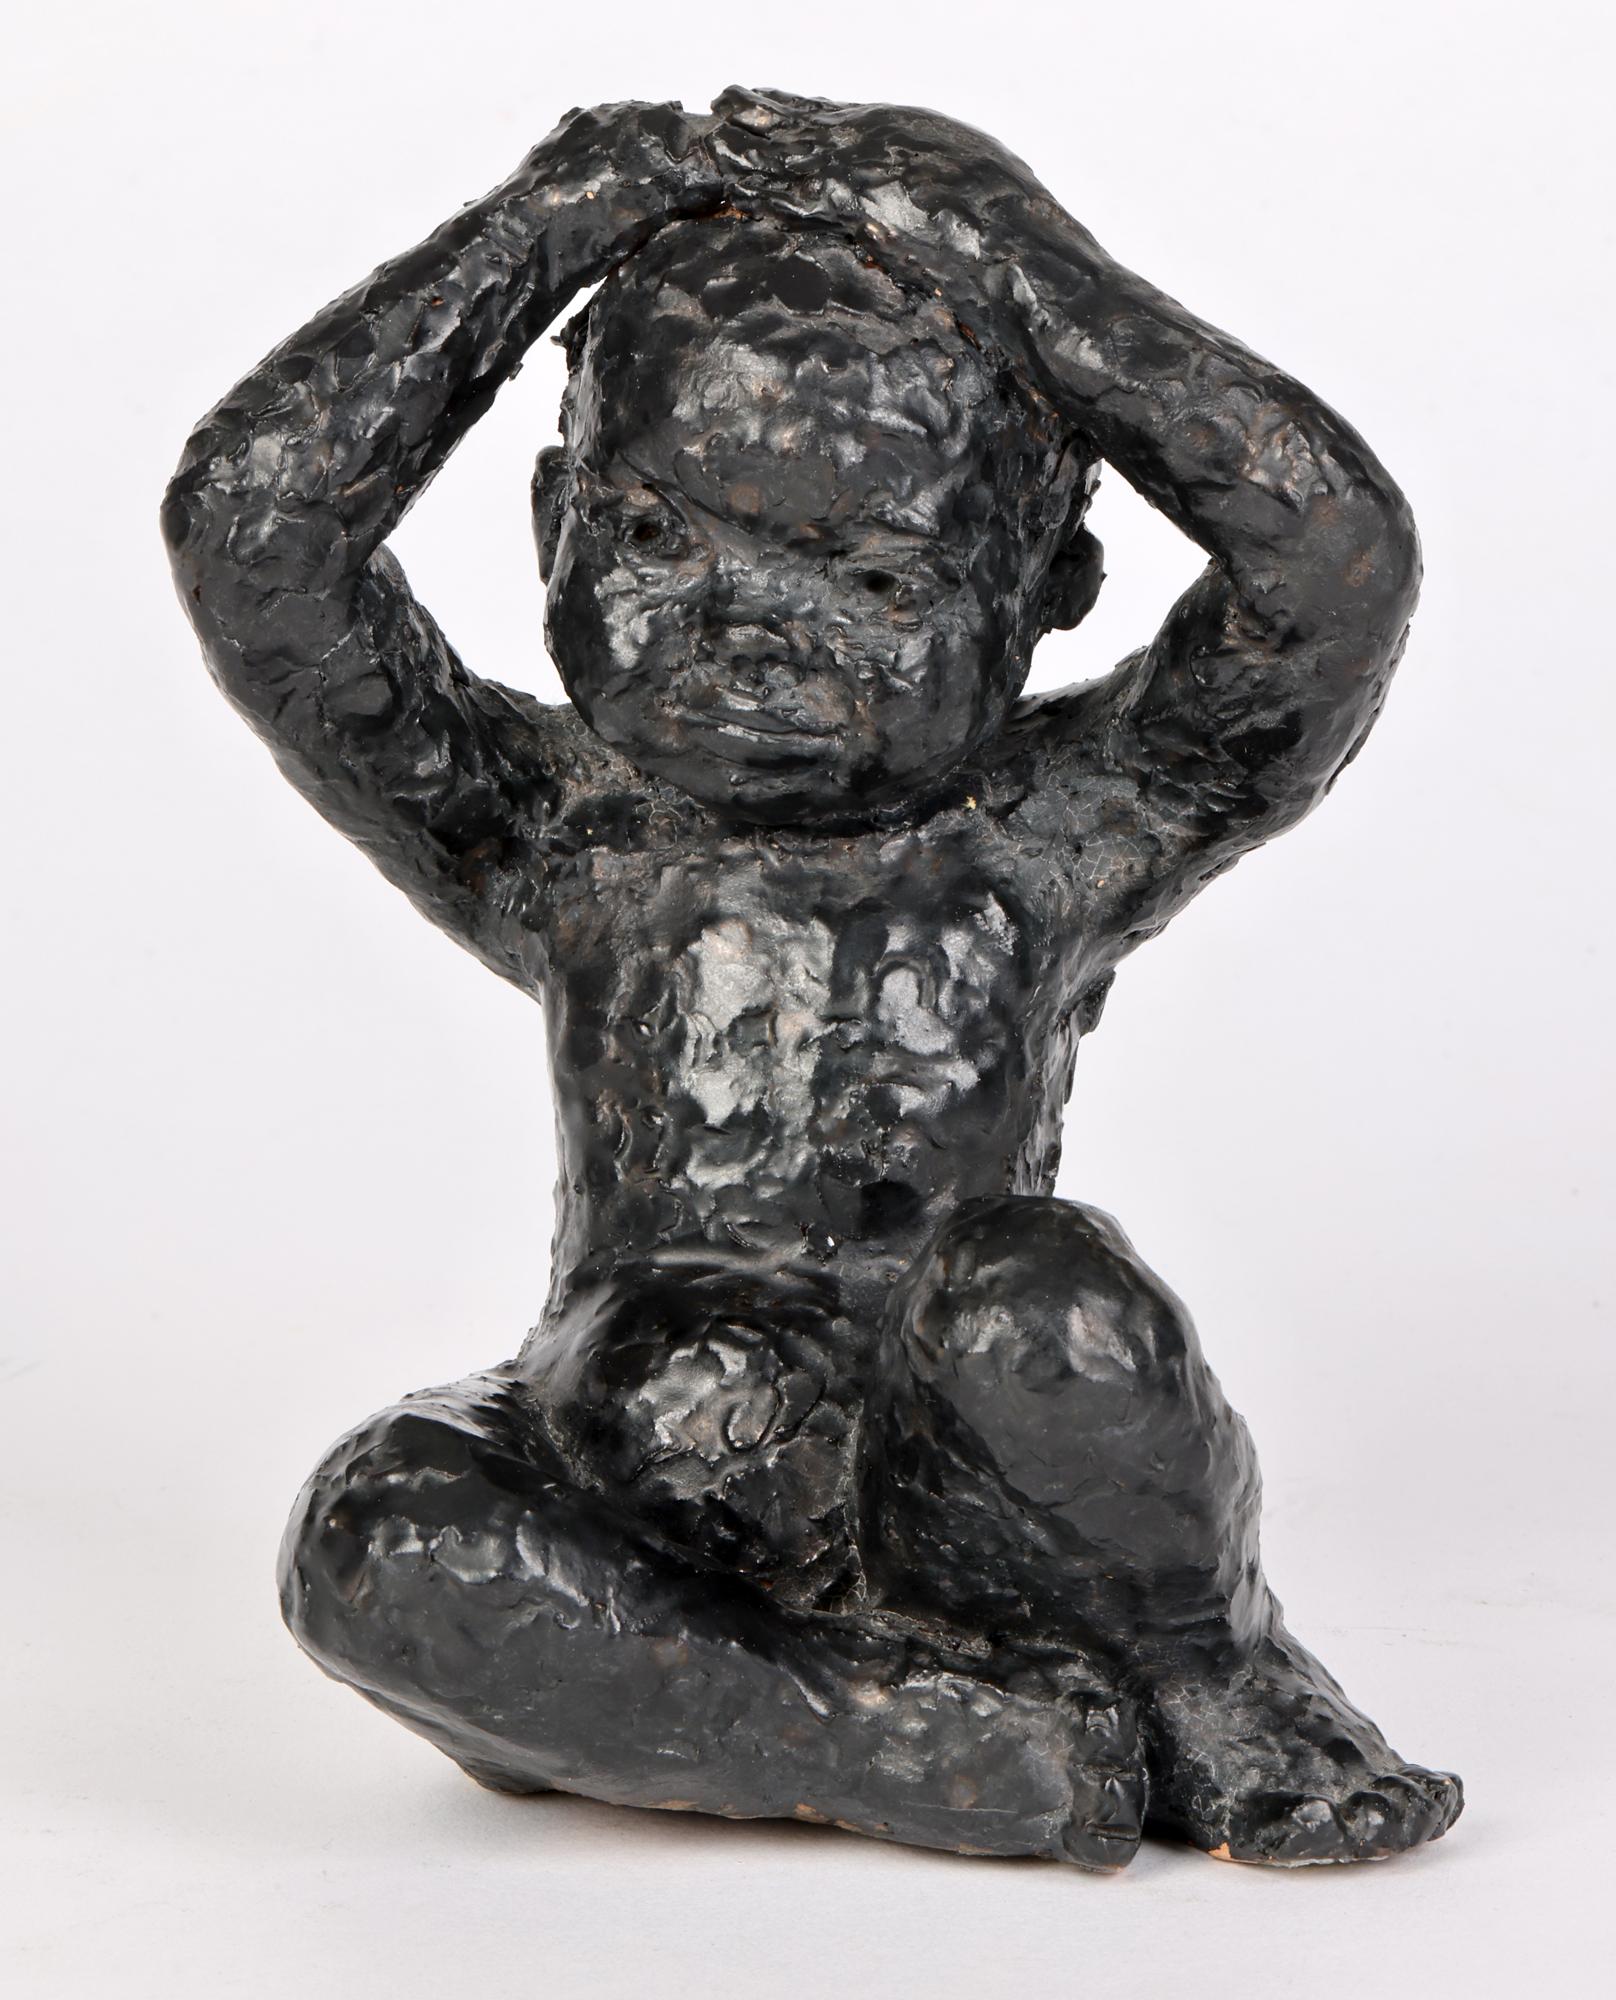 George West Studio Pottery Black Glazed Seated Child Sculpture Dated 1969 For Sale 9